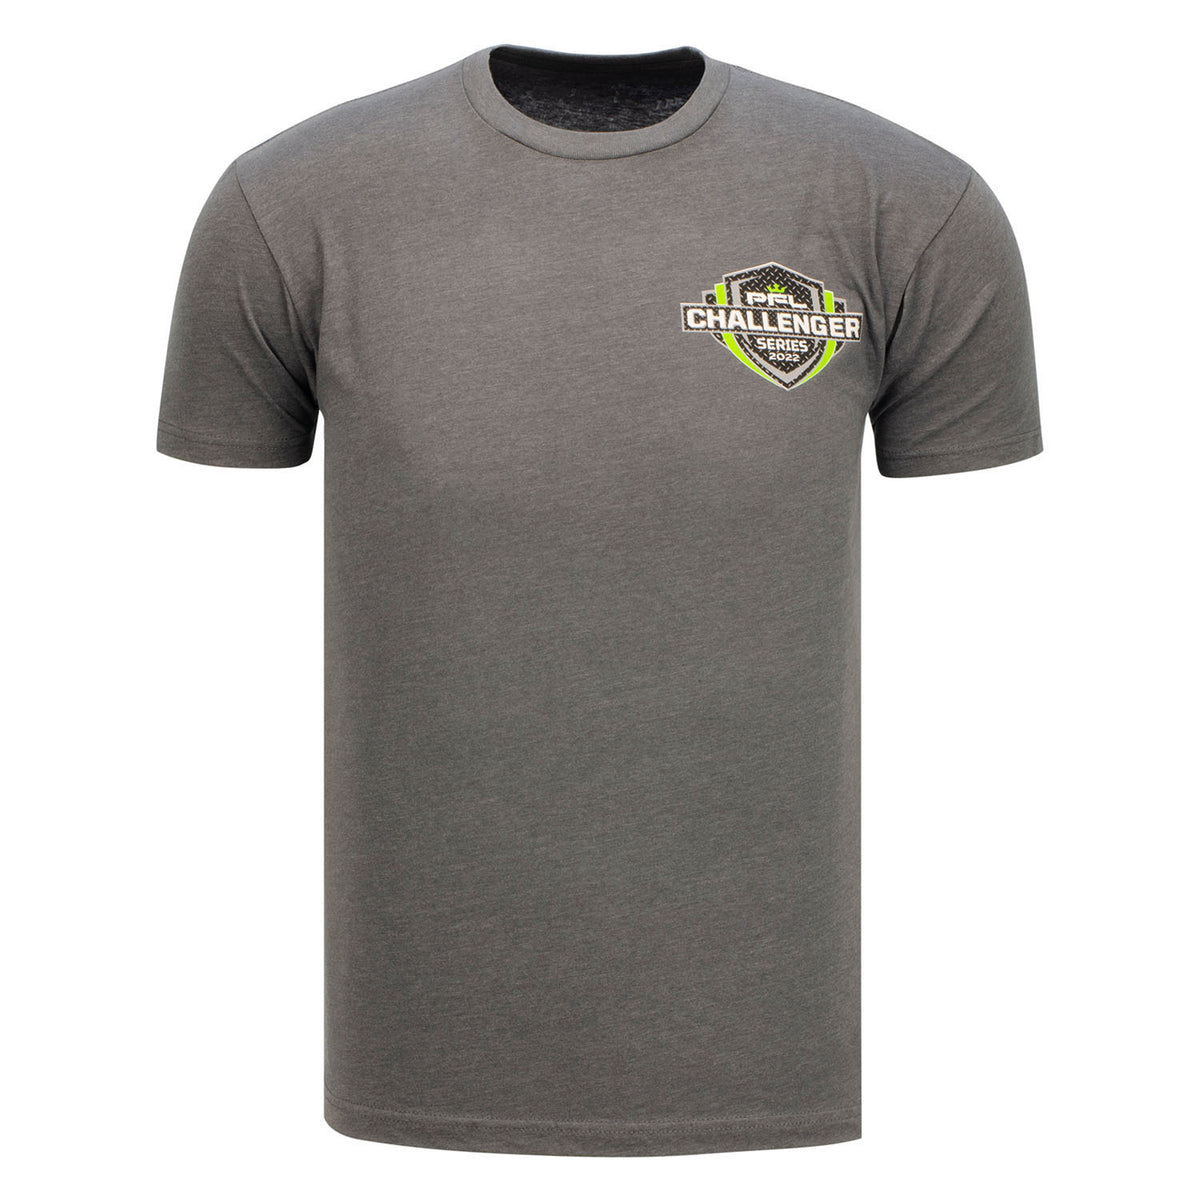 Challenger Series Come Up T-Shirt in Grey - Front View